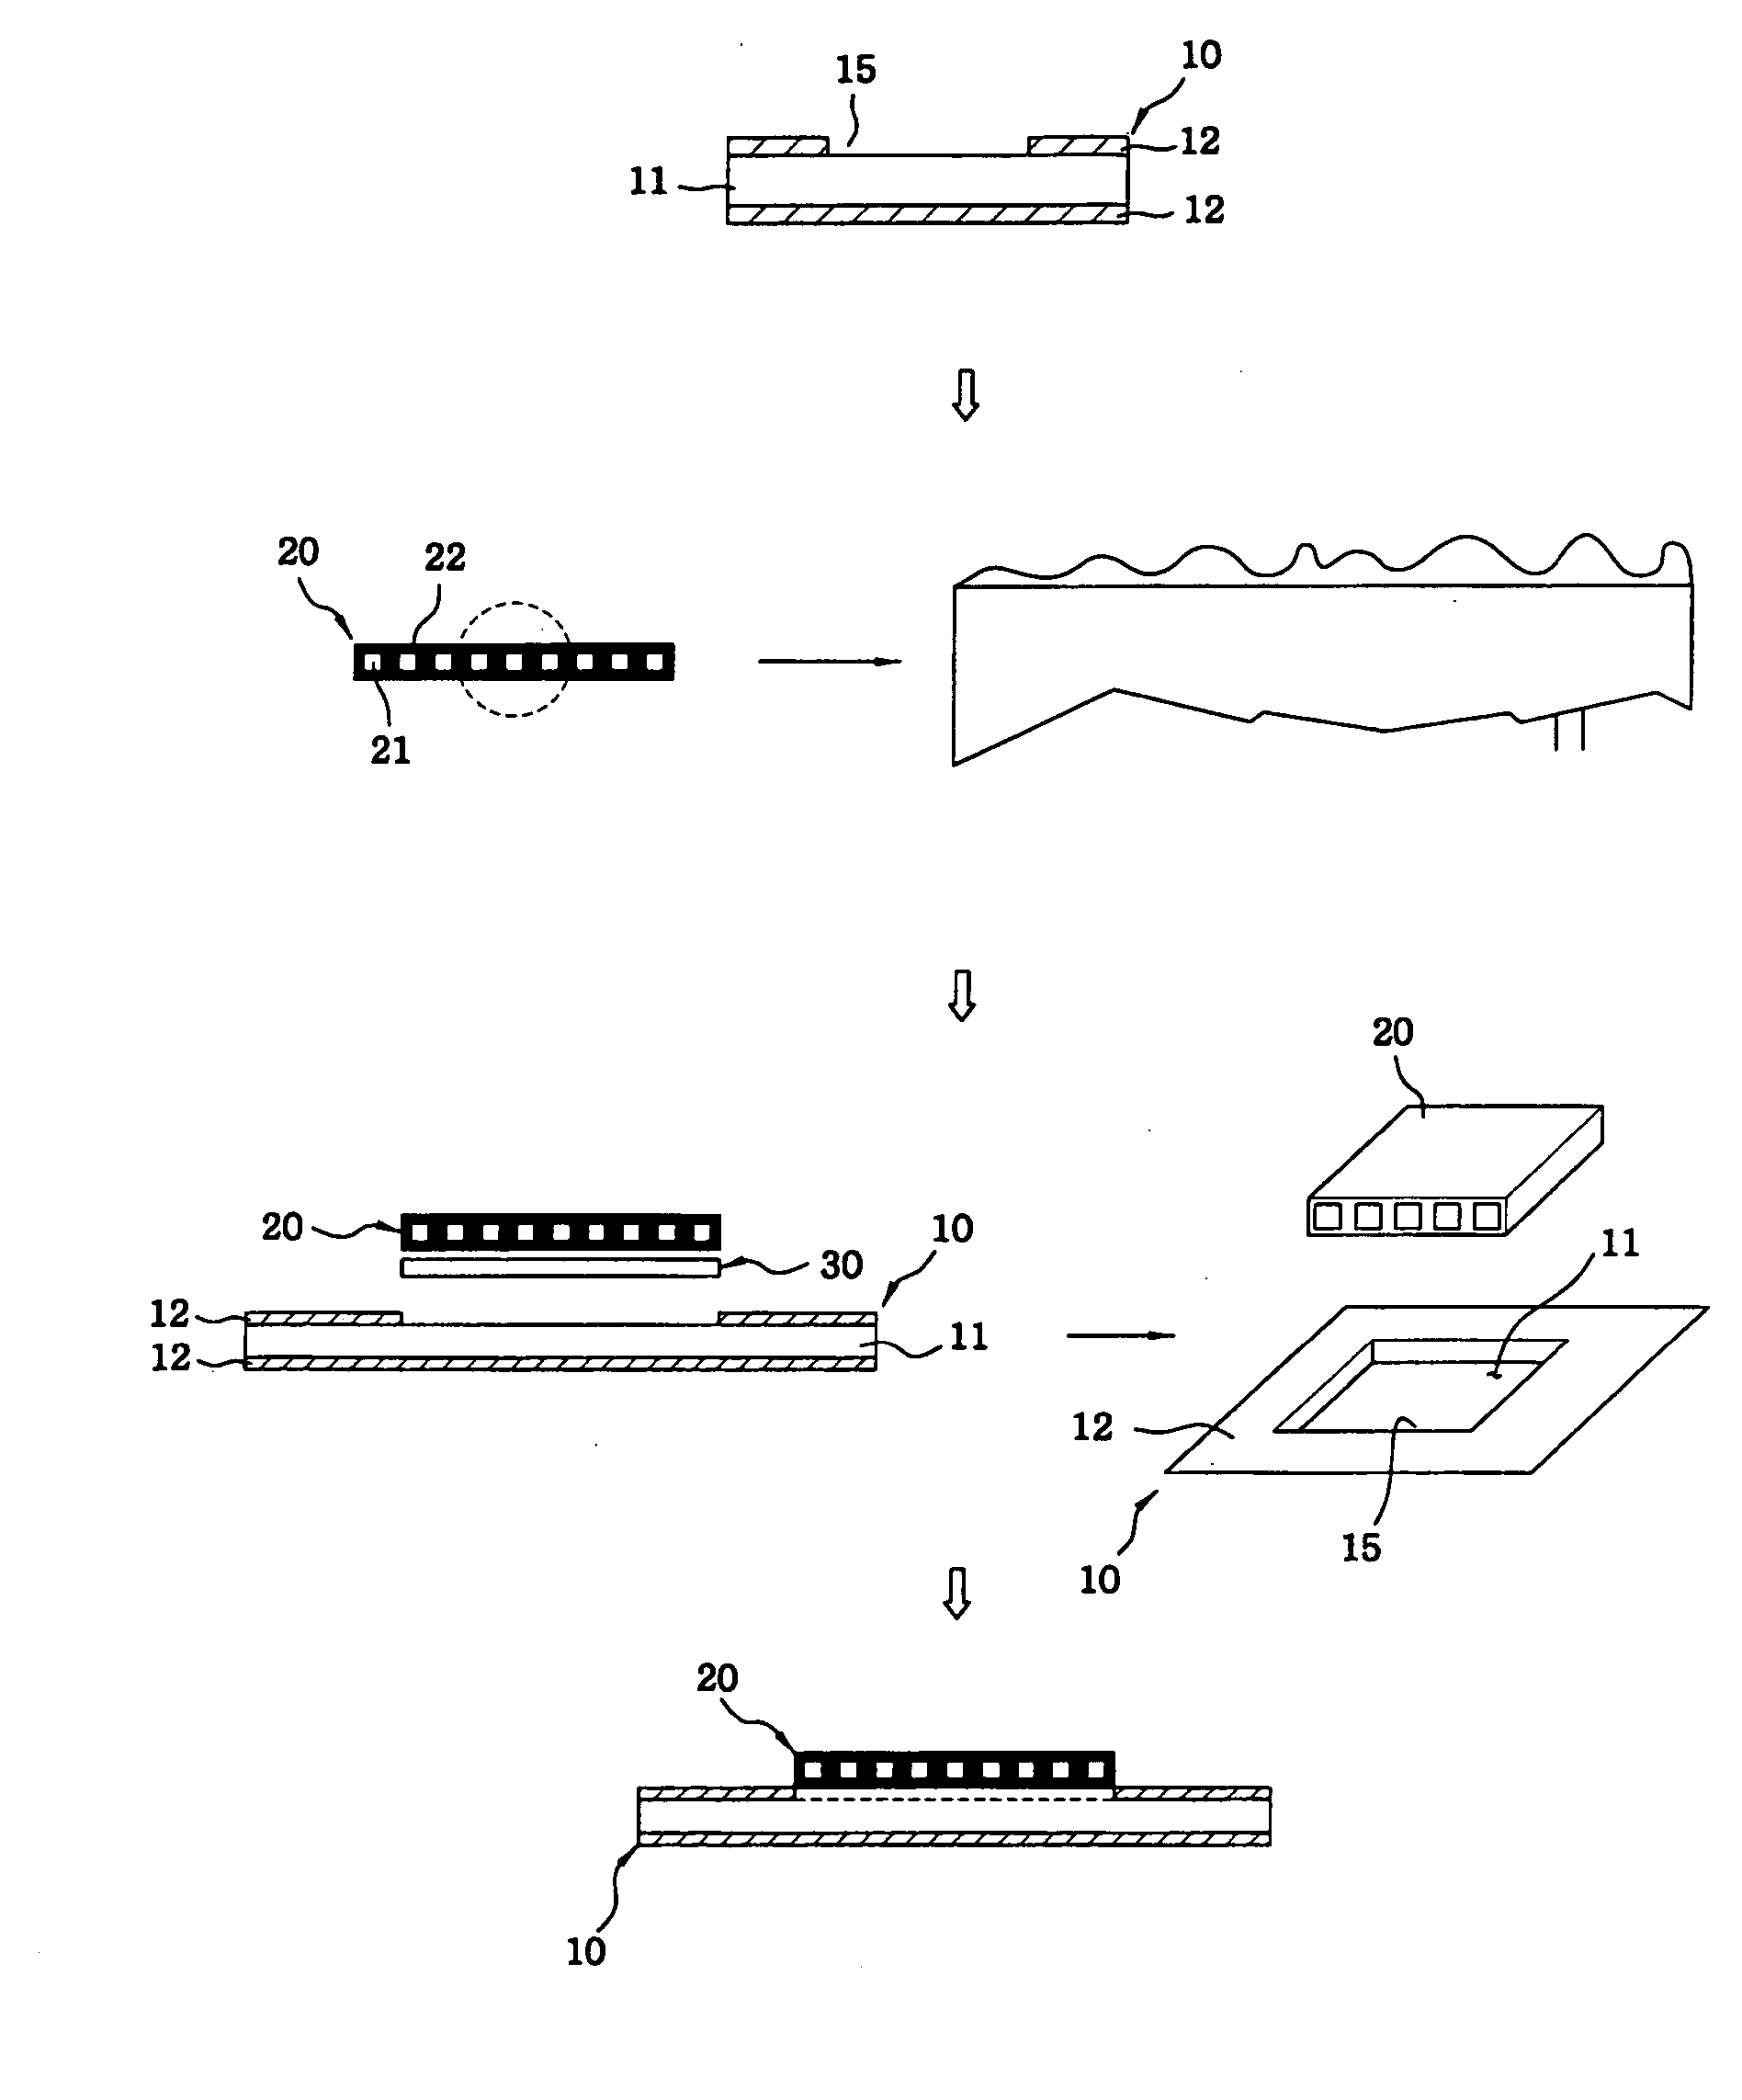 Method of attaching optical waveguide component to printed circuit board